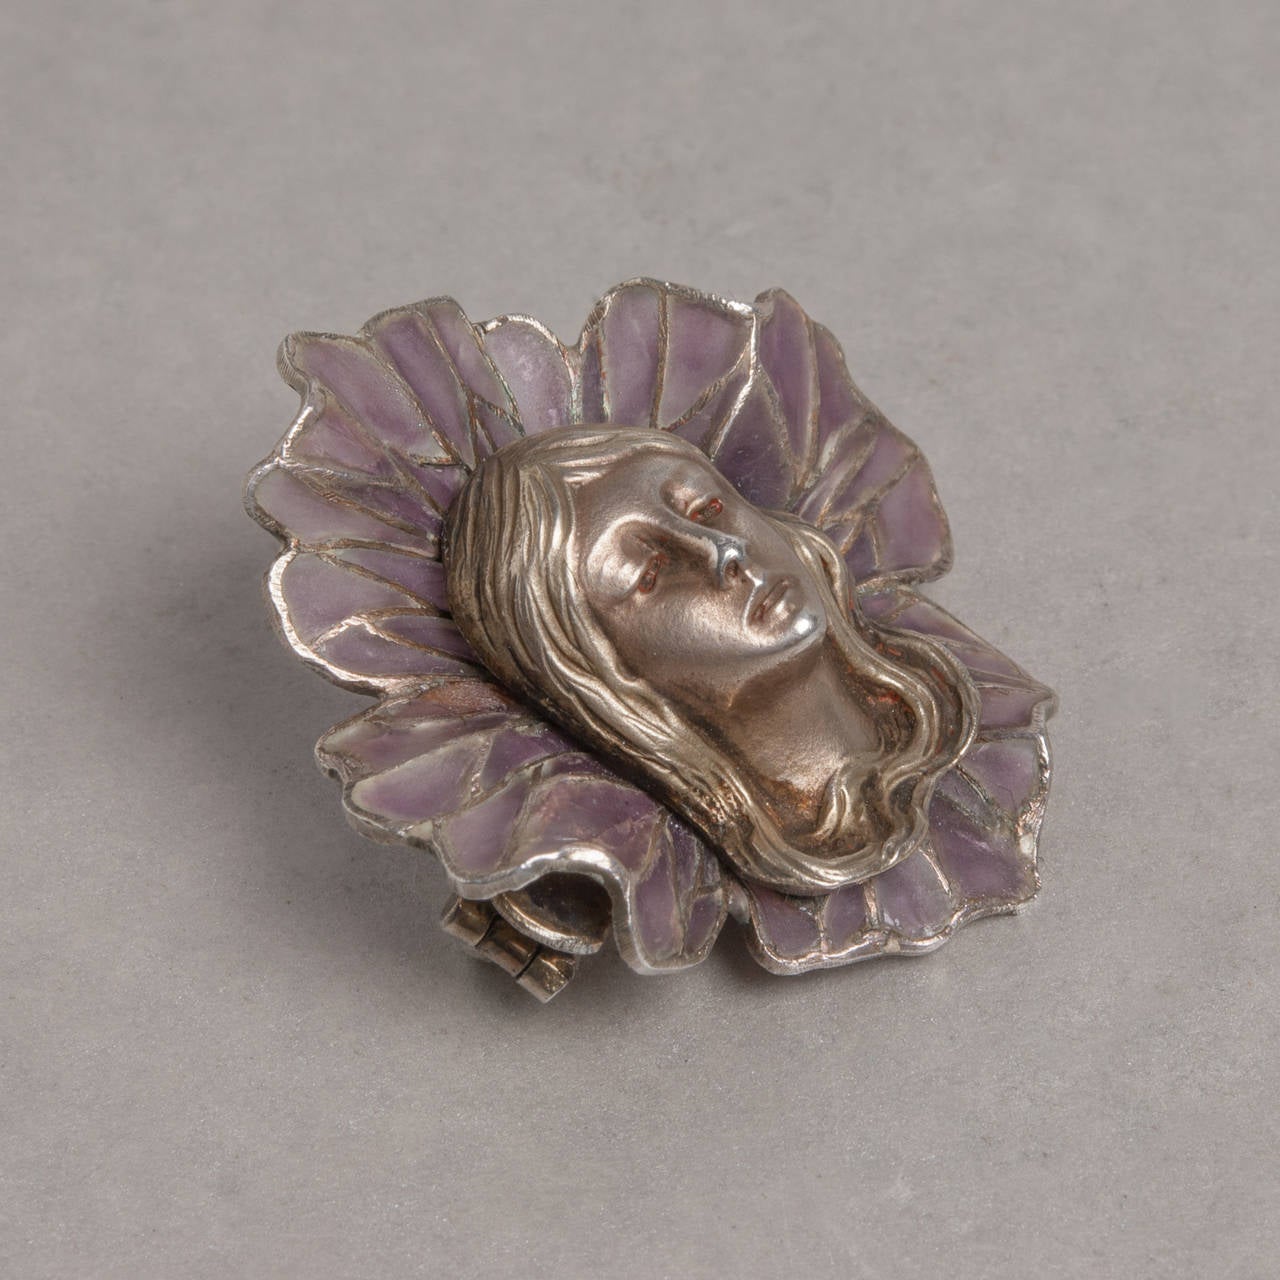 A stunning silver and plique-à-jour enamel pin depicting a woman's face surrounded by flower petals. The floral plique-à-jour enamel work creates a unique effect due to its subtle violet hue and semi-translucence appearance.